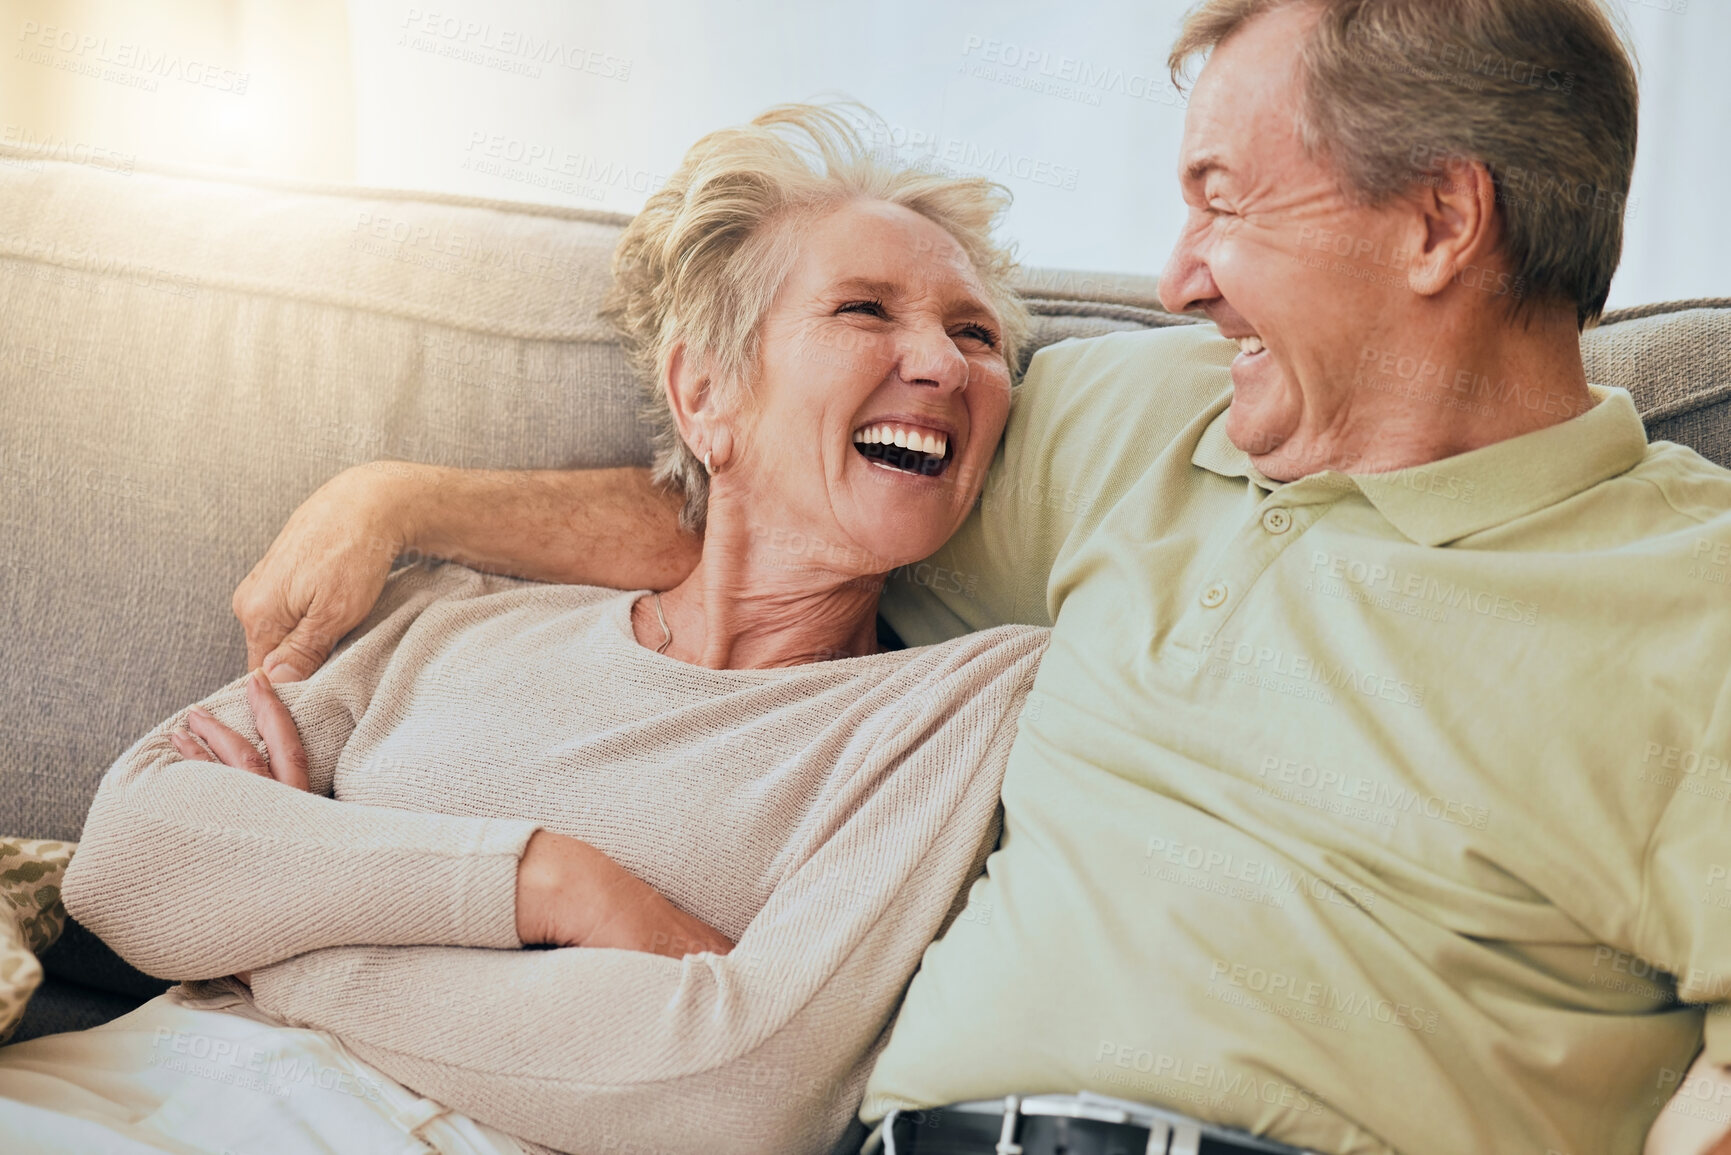 Buy stock photo Elderly couple, laugh and hug on sofa in happy relationship, silly face or bonding together at home. Senior couple laughing, humor or relaxing while making funny goofy faces on living room couch